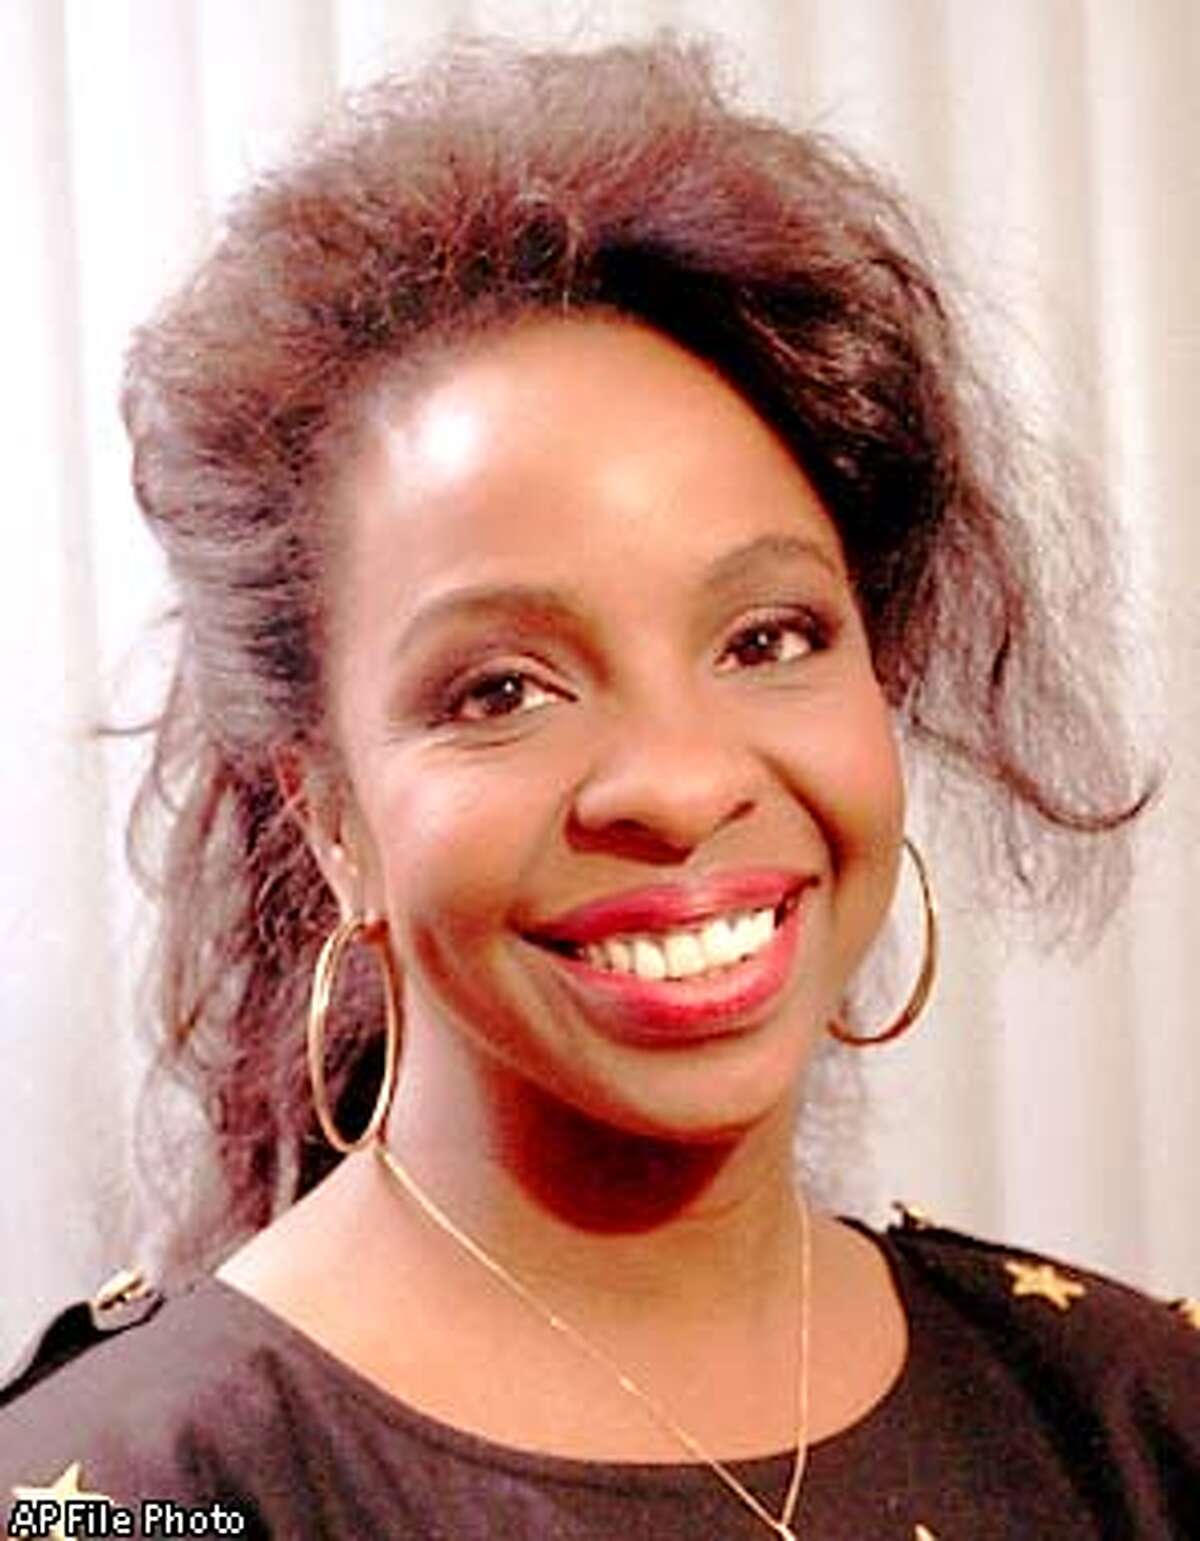 FILE--Singer Gladys Knight, seen in this 1990 file photo, will become the spokeswoman for Aunt Jemina pancakes and syrup, Quaker Oats announced Friday, Sept. 16, 1994. The Quaker Oats Co. hopes the singer will help dispel negative racial stereotypes attached to the popular brand. (AP Photo/File)